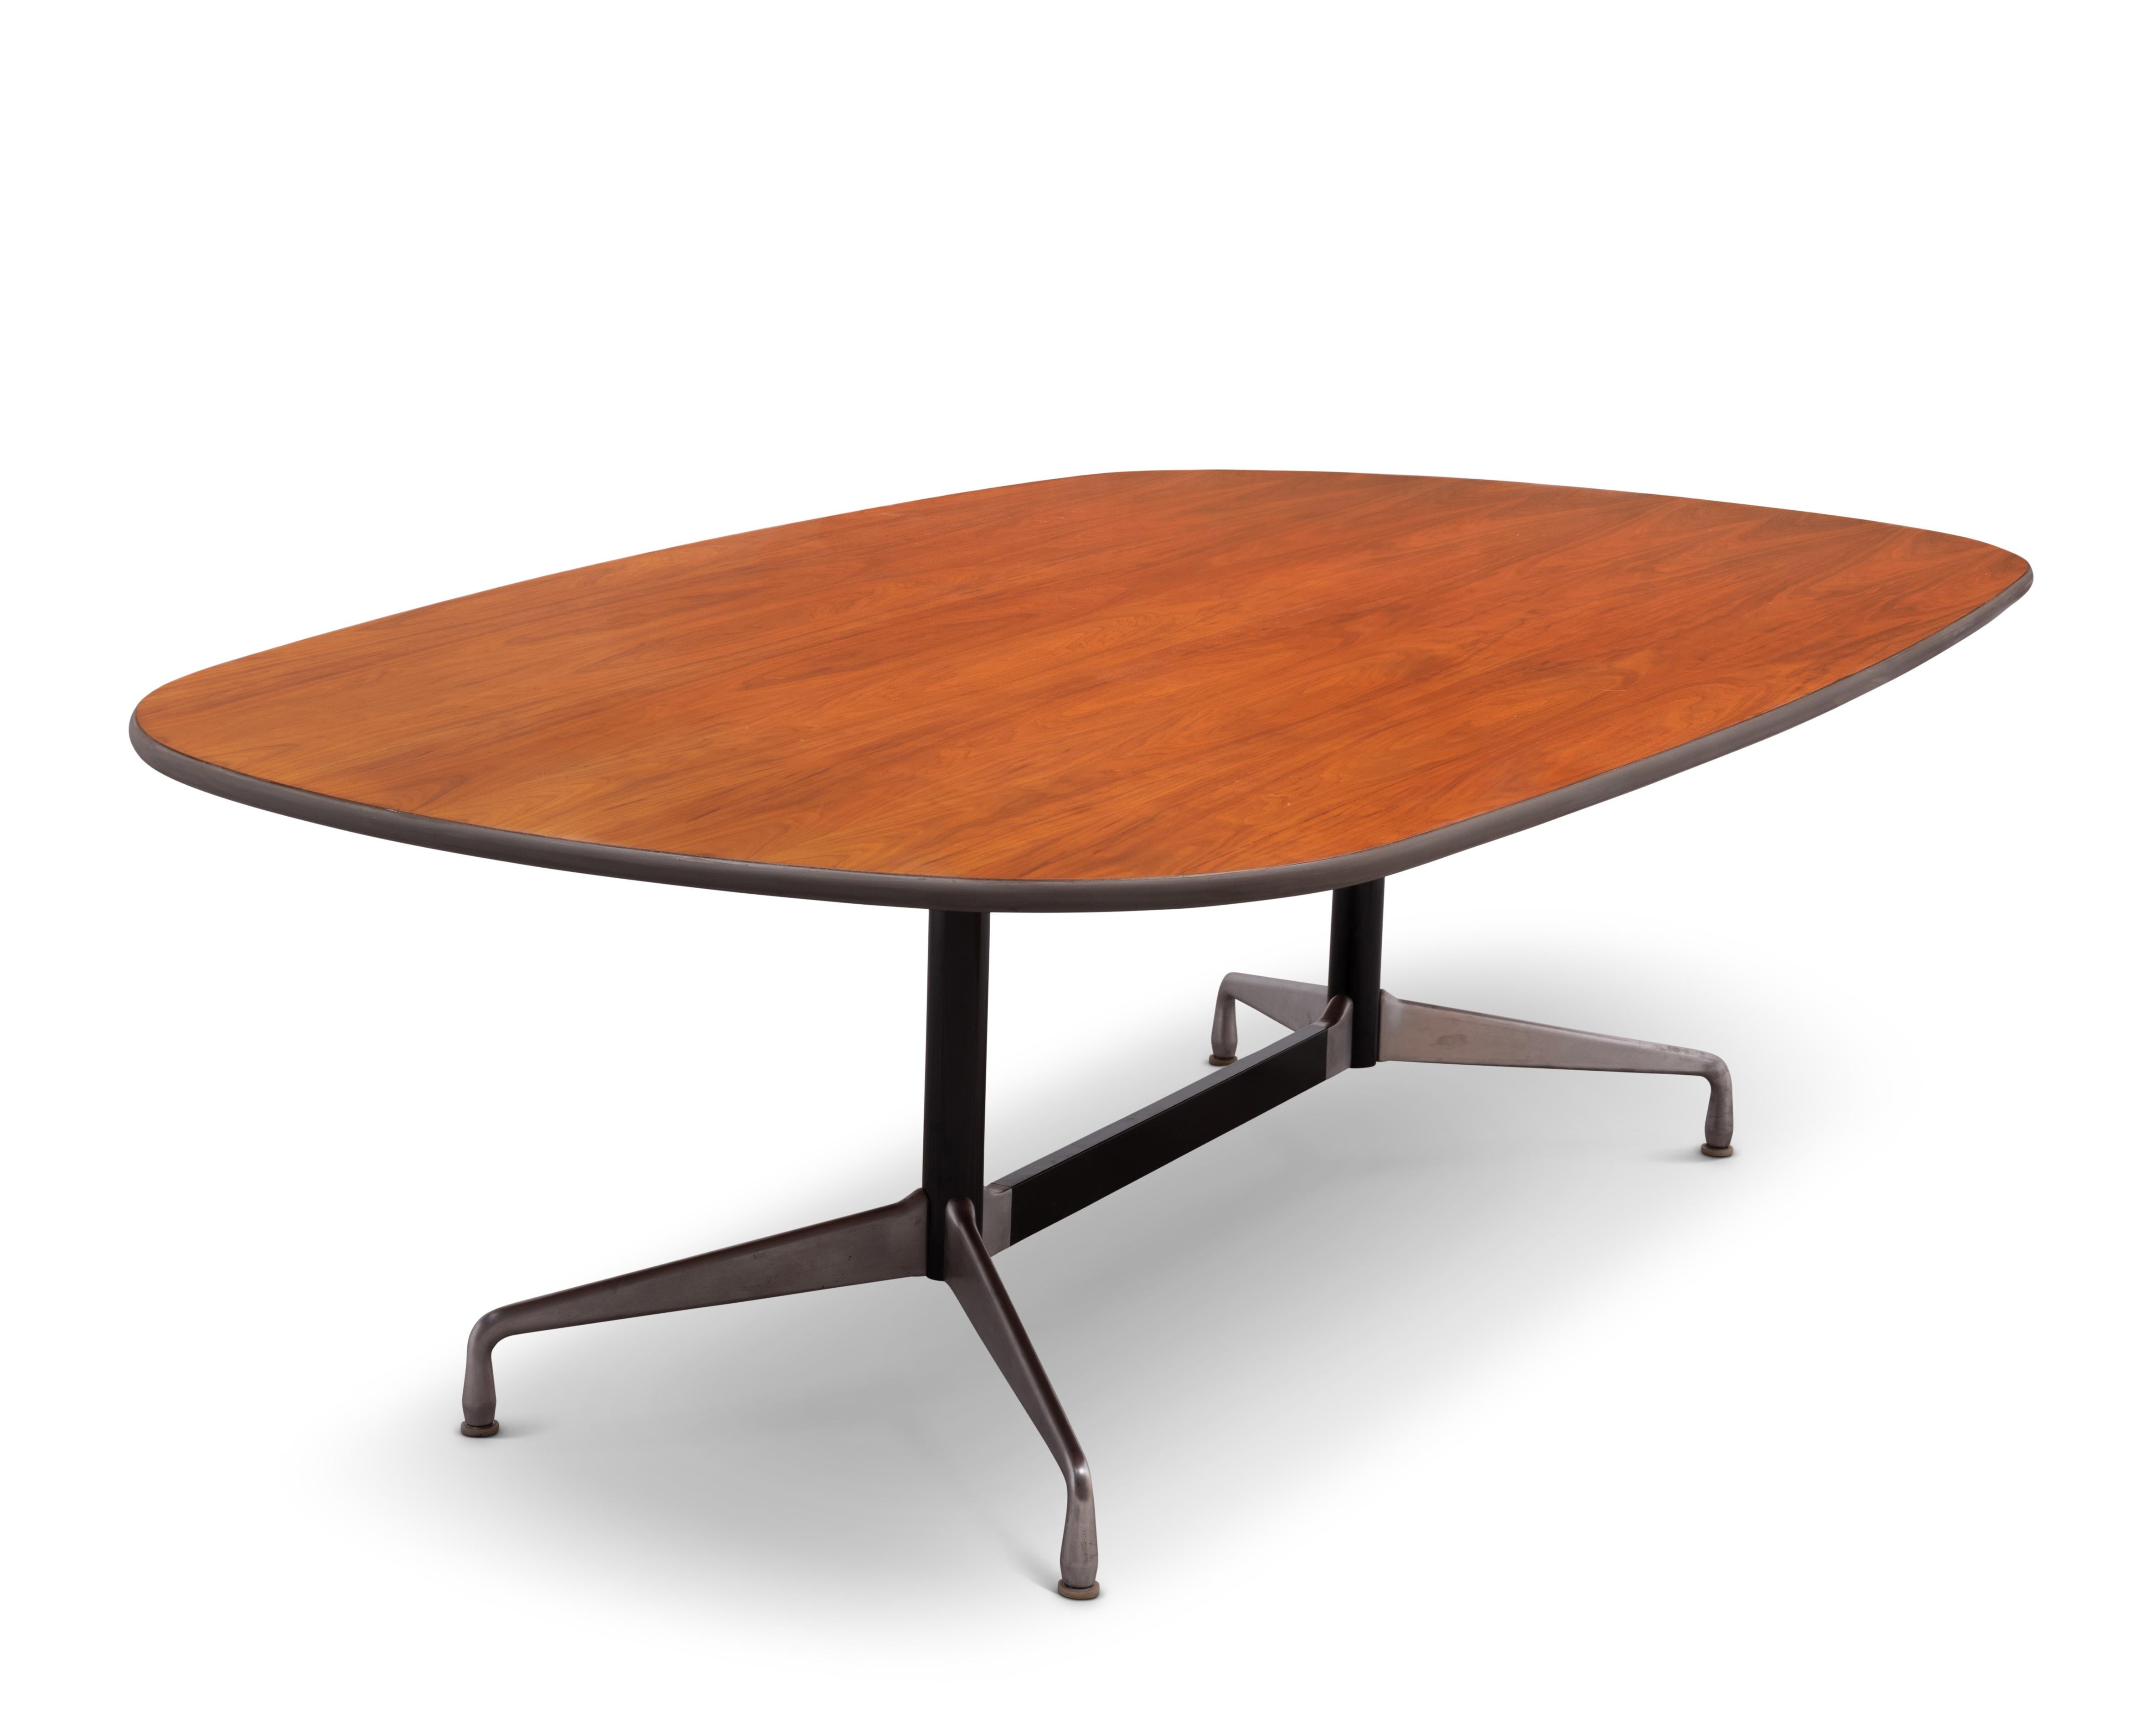 Eight foot long walnut dining / conference table designed by Charles and Ray Eames and manufactured by Herman Miller. Stamped 